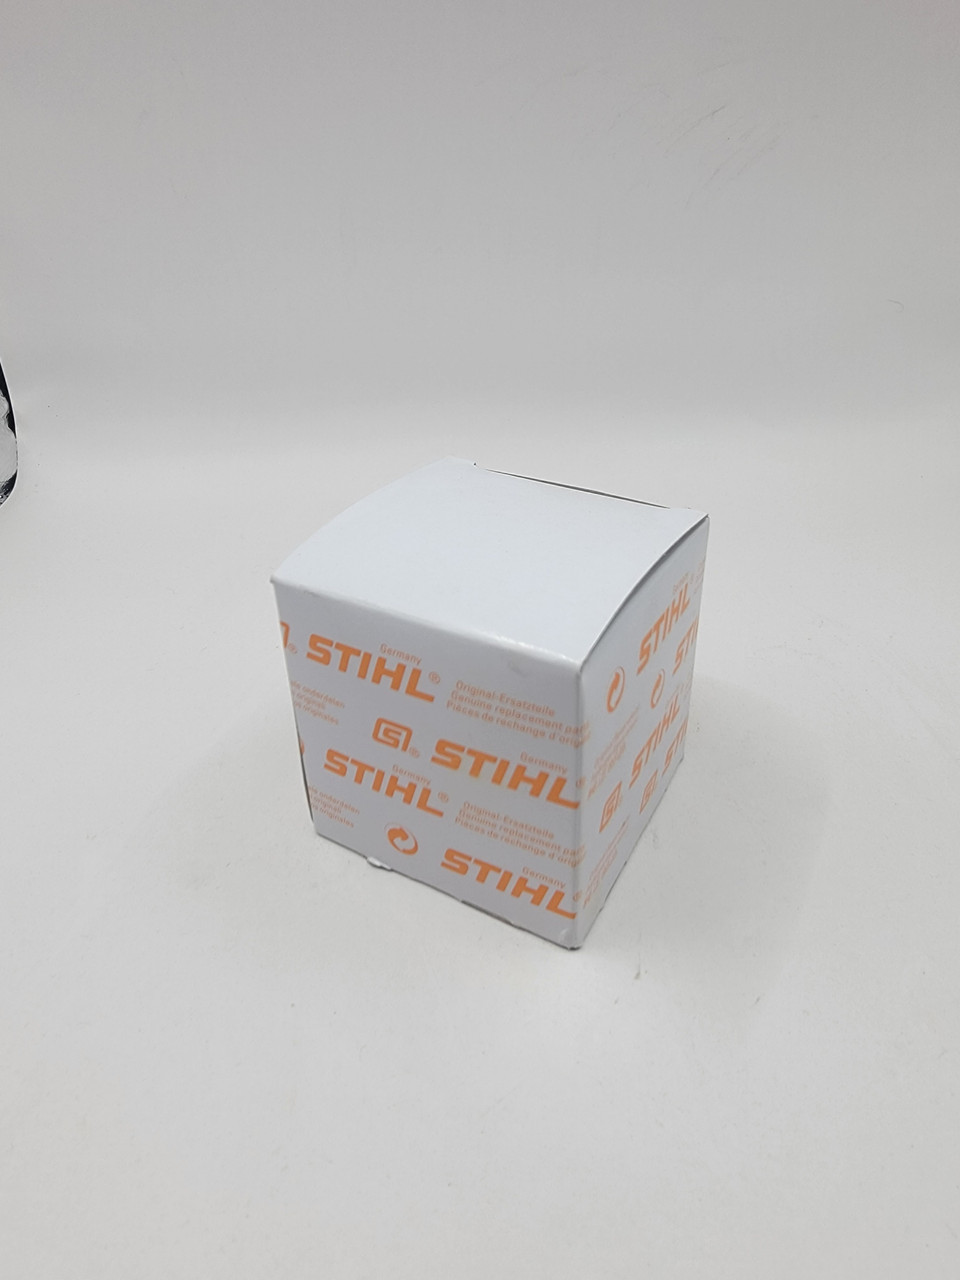 Stihl 0458 388 8621 INSTRUCTION MANUAL HL 100 one package